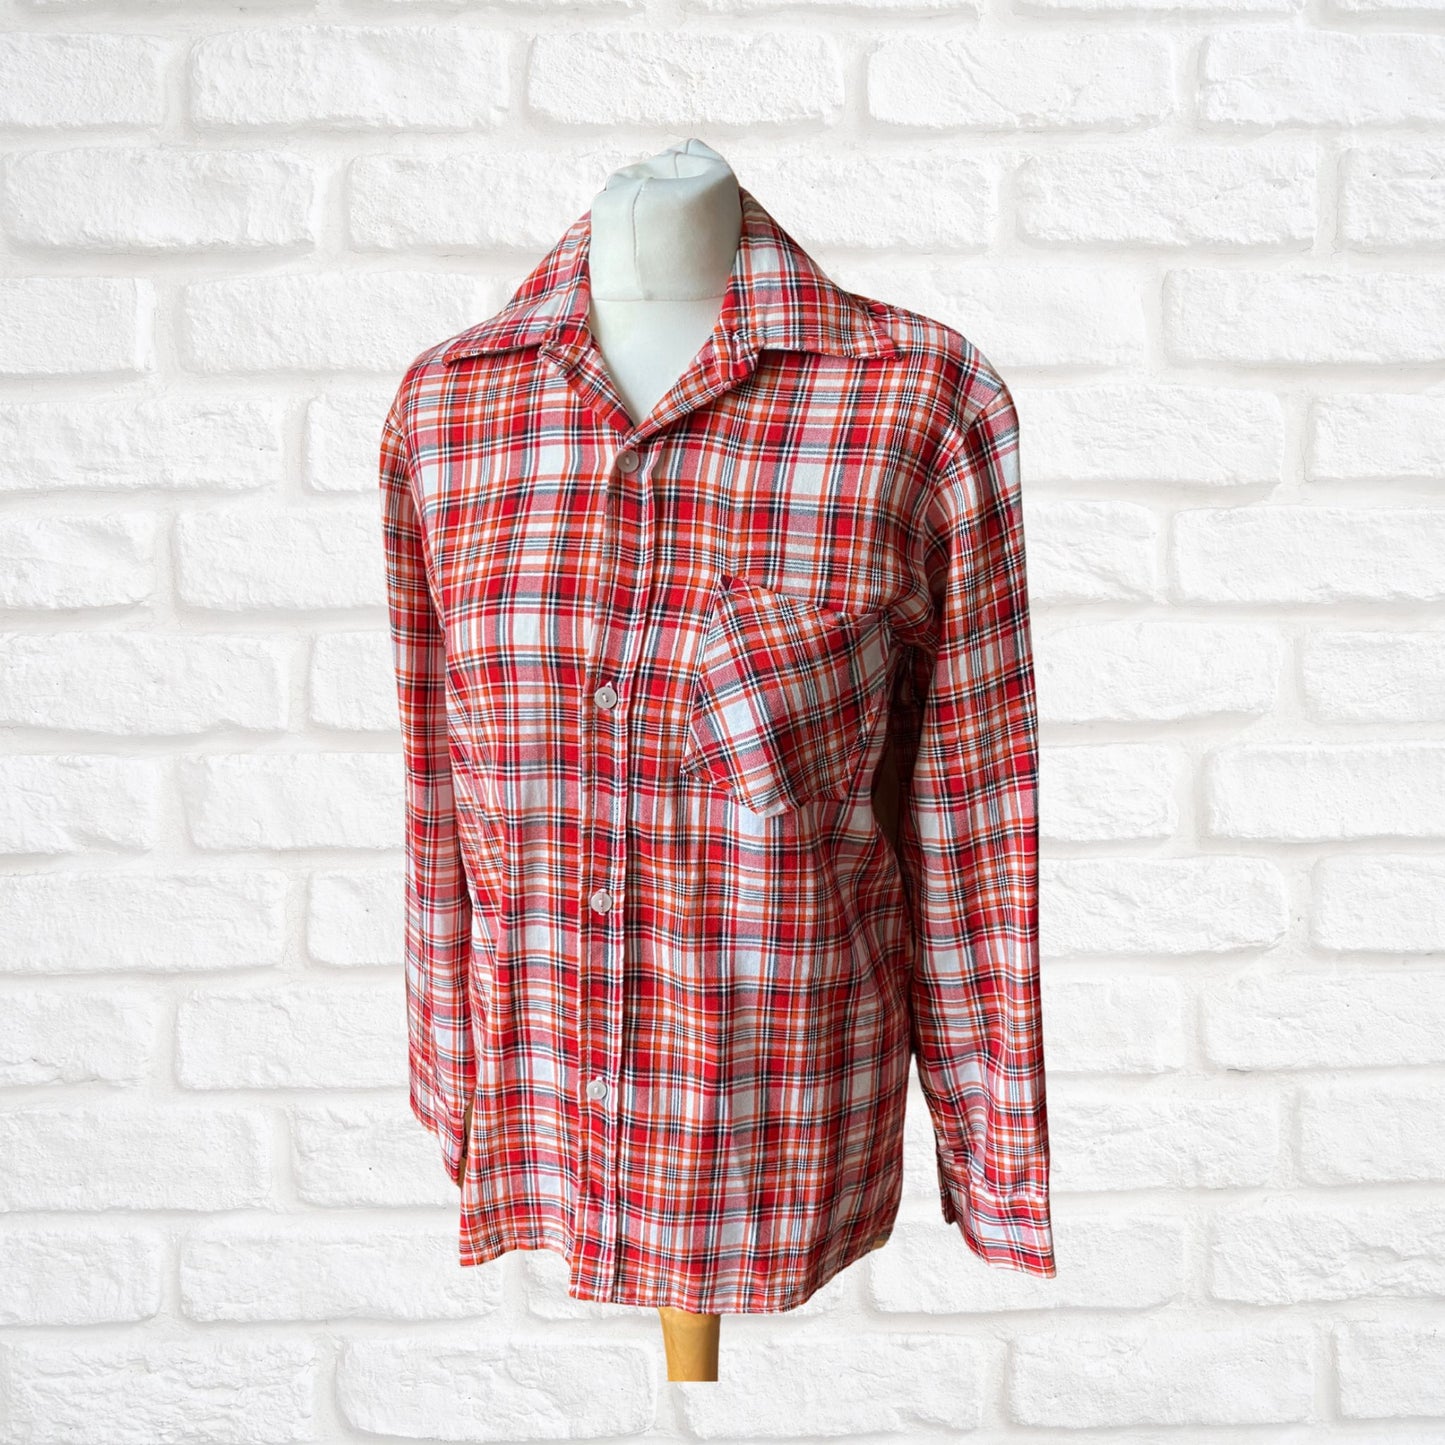 70s Vintage Checked Lightweight Shirt with Wide Collar - Classic Retro Style. Approx UK size XS -S (men) 8-12 (women)